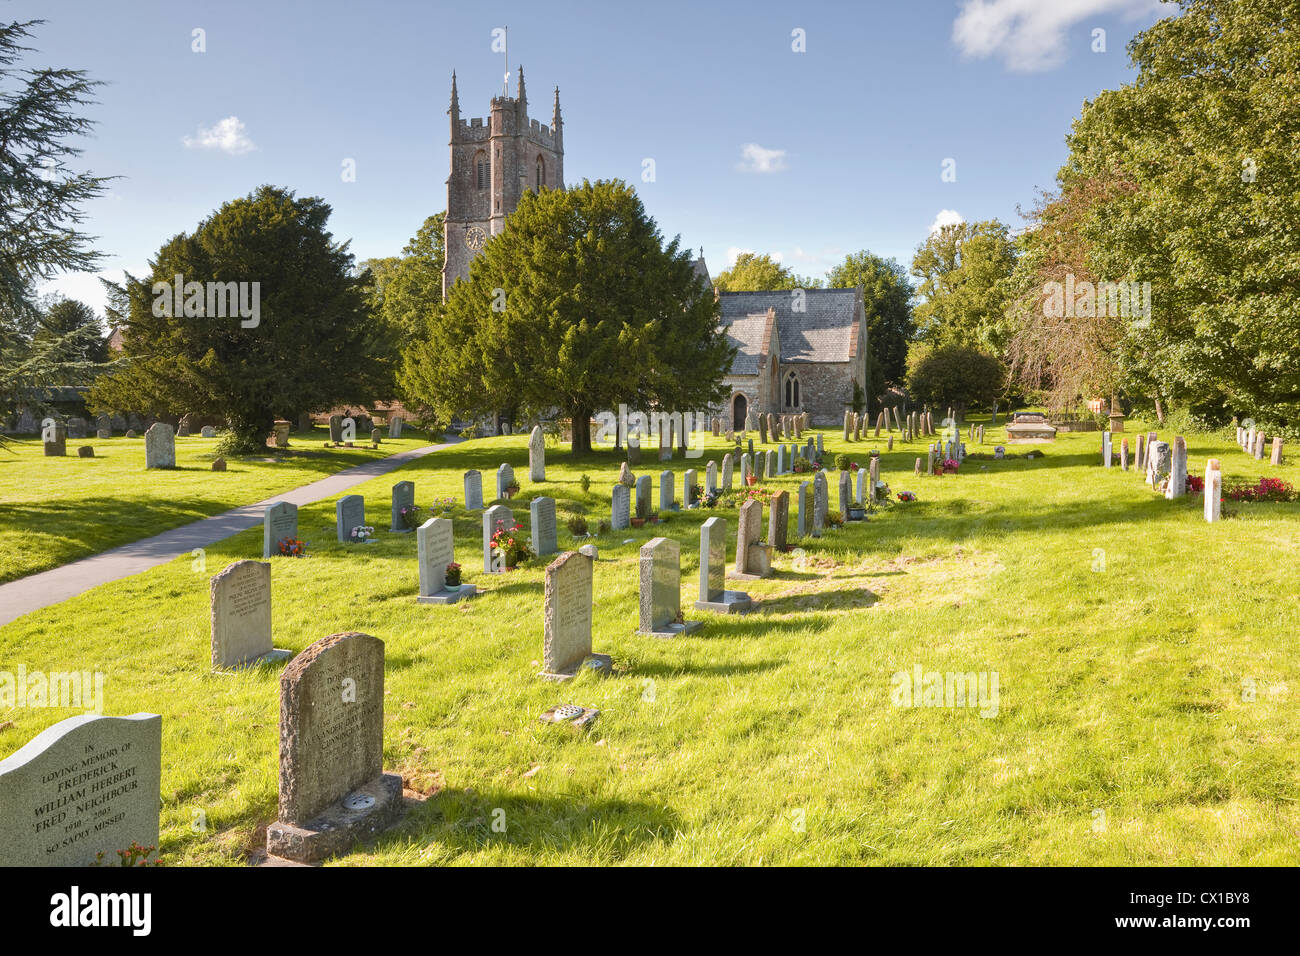 The church of St James with its graveyard in Avebury, Wiltshire. Stock Photo